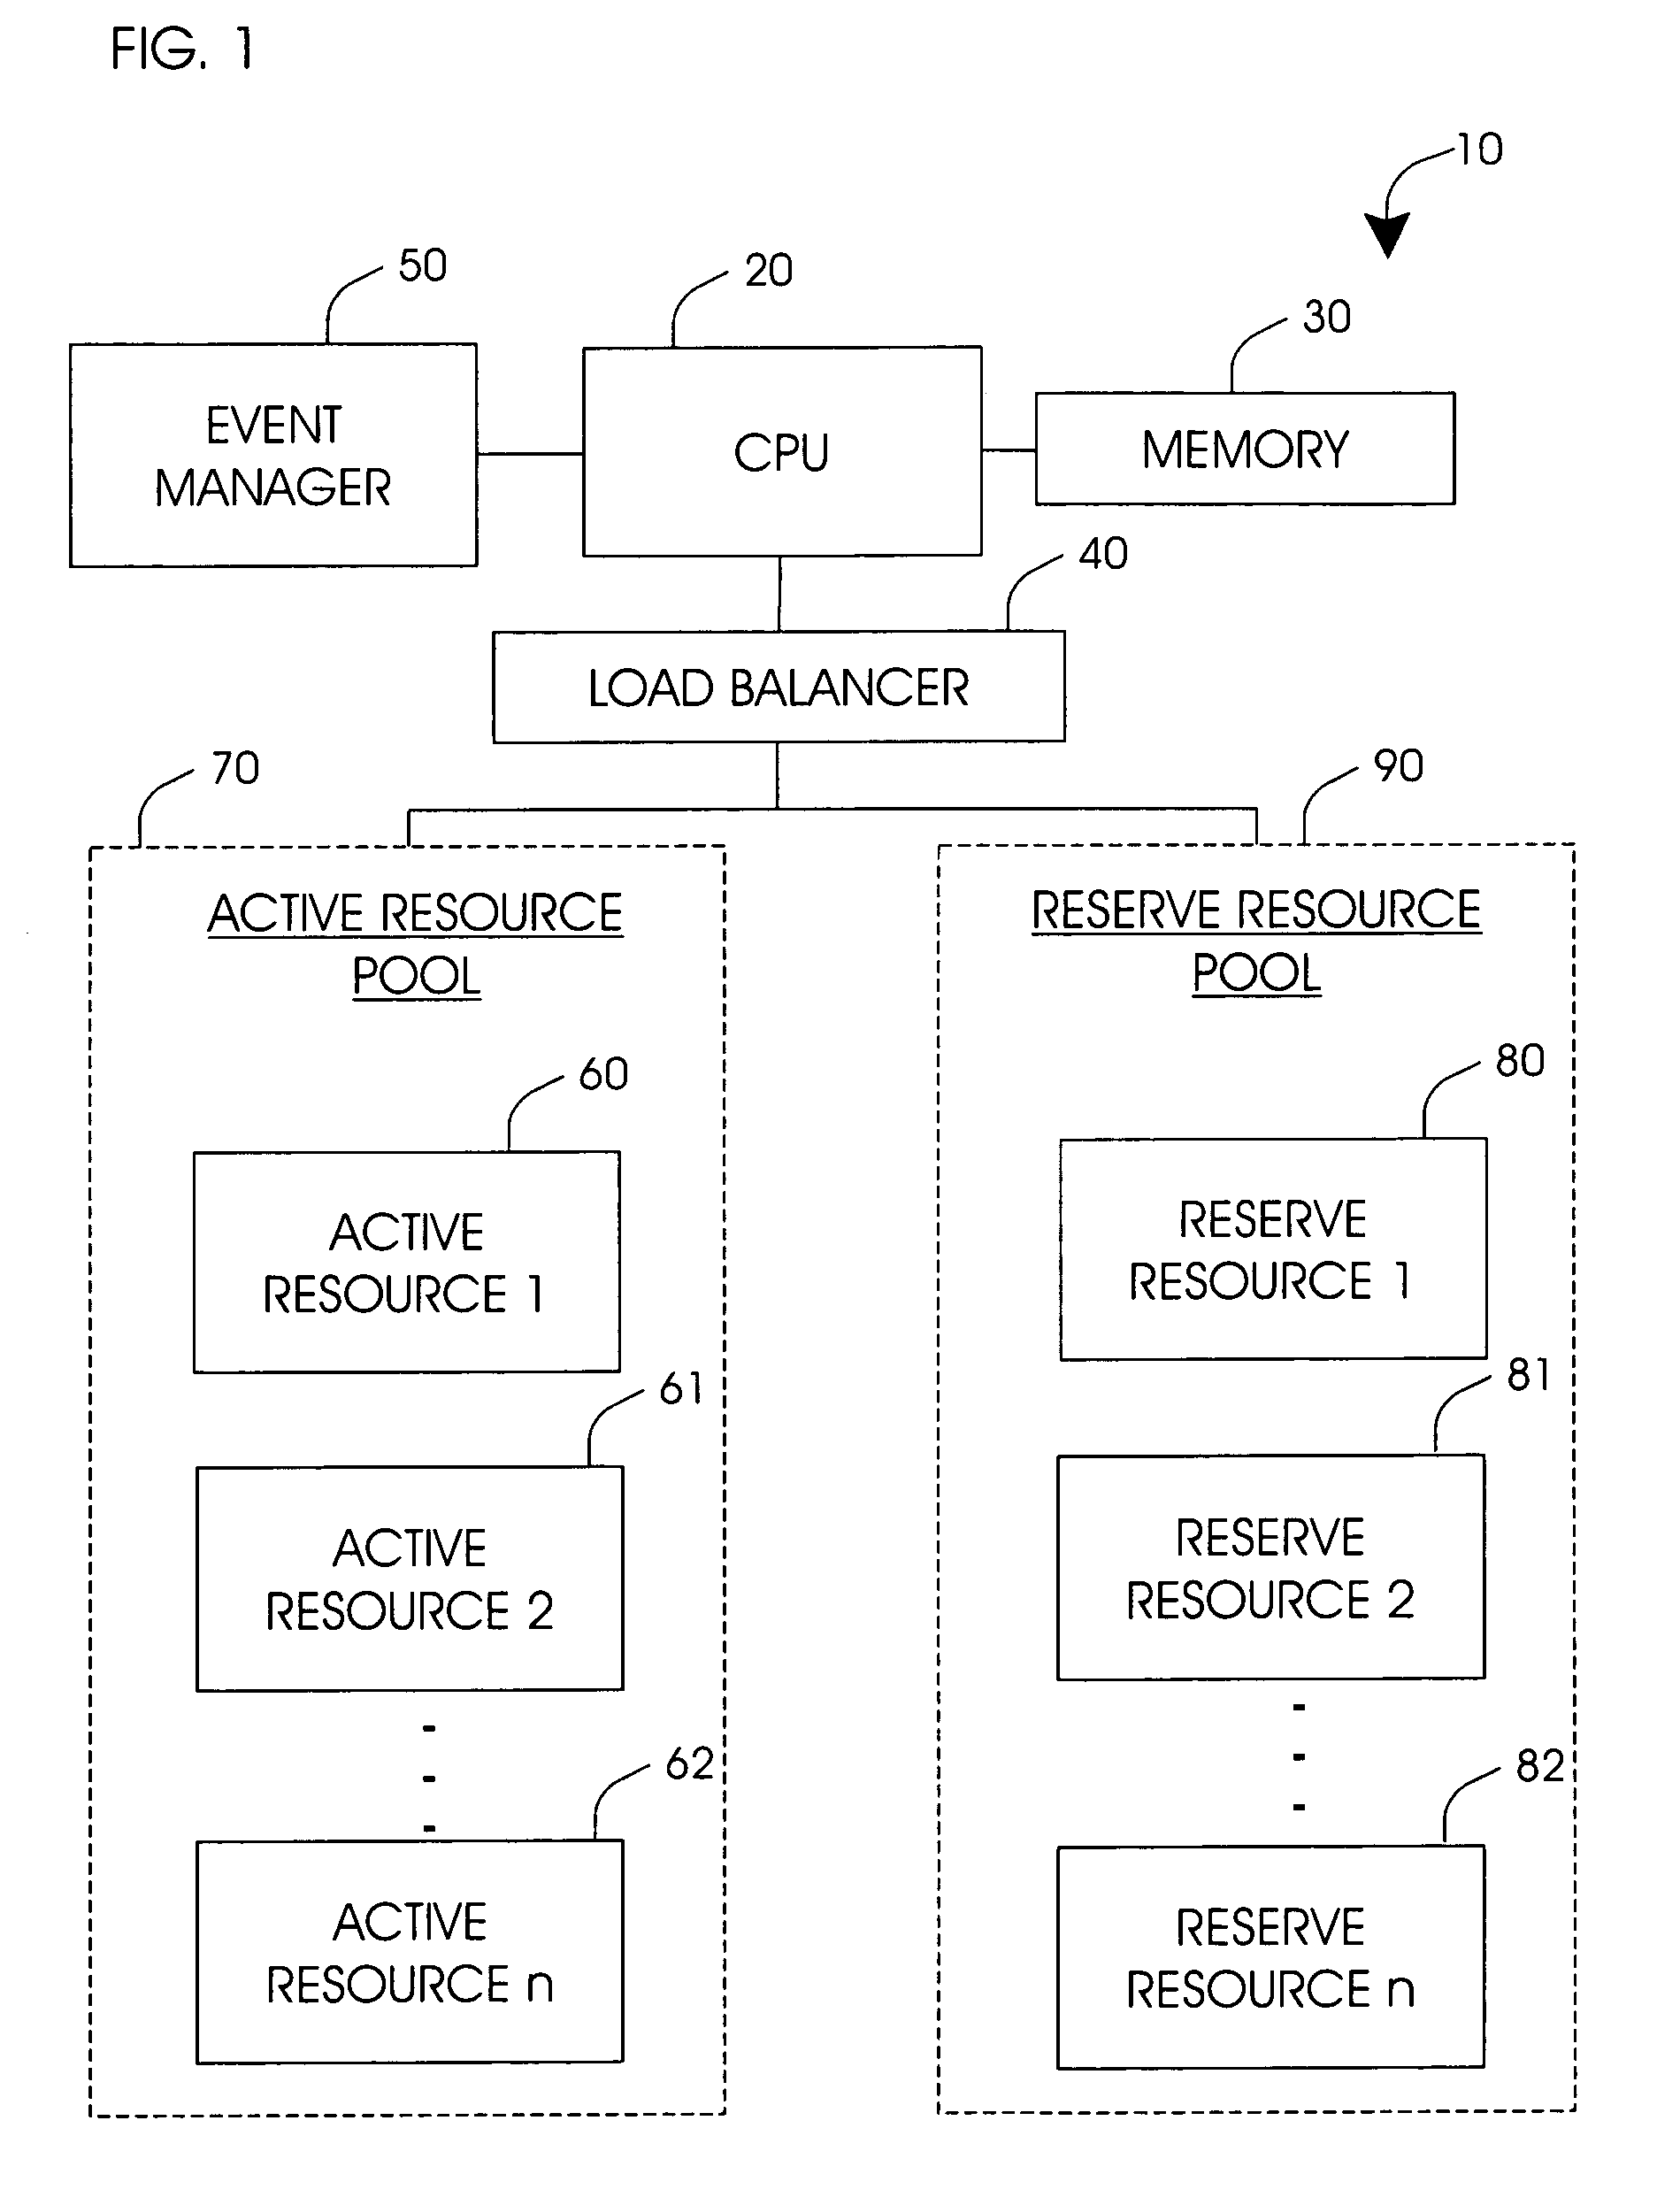 System for automatically activating reserve hardware component based on hierarchical resource deployment scheme or rate of resource consumption